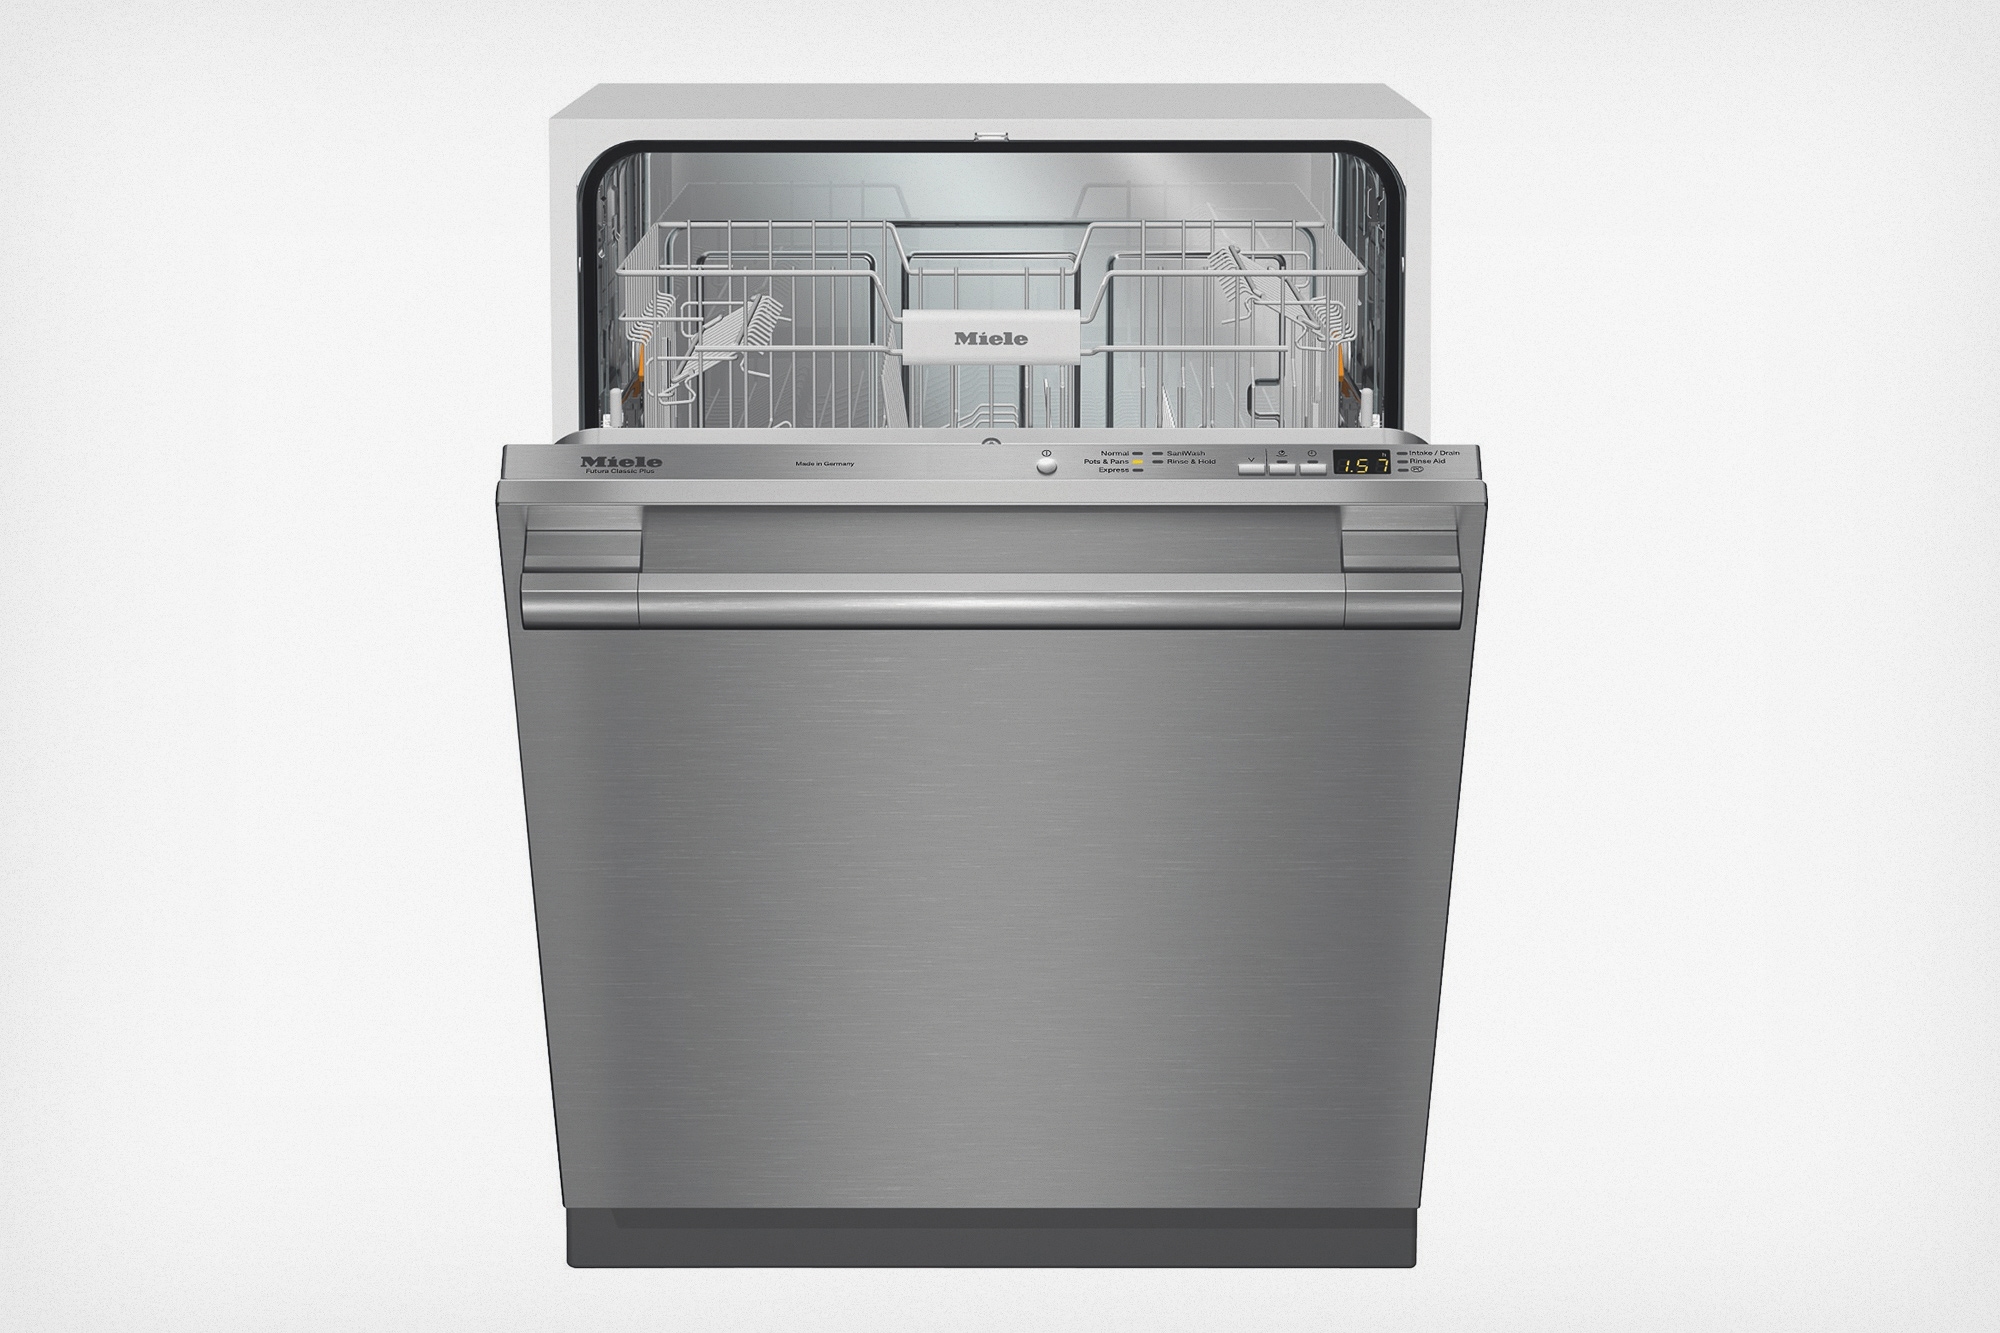 The best dishwasher | DeviceDaily.com